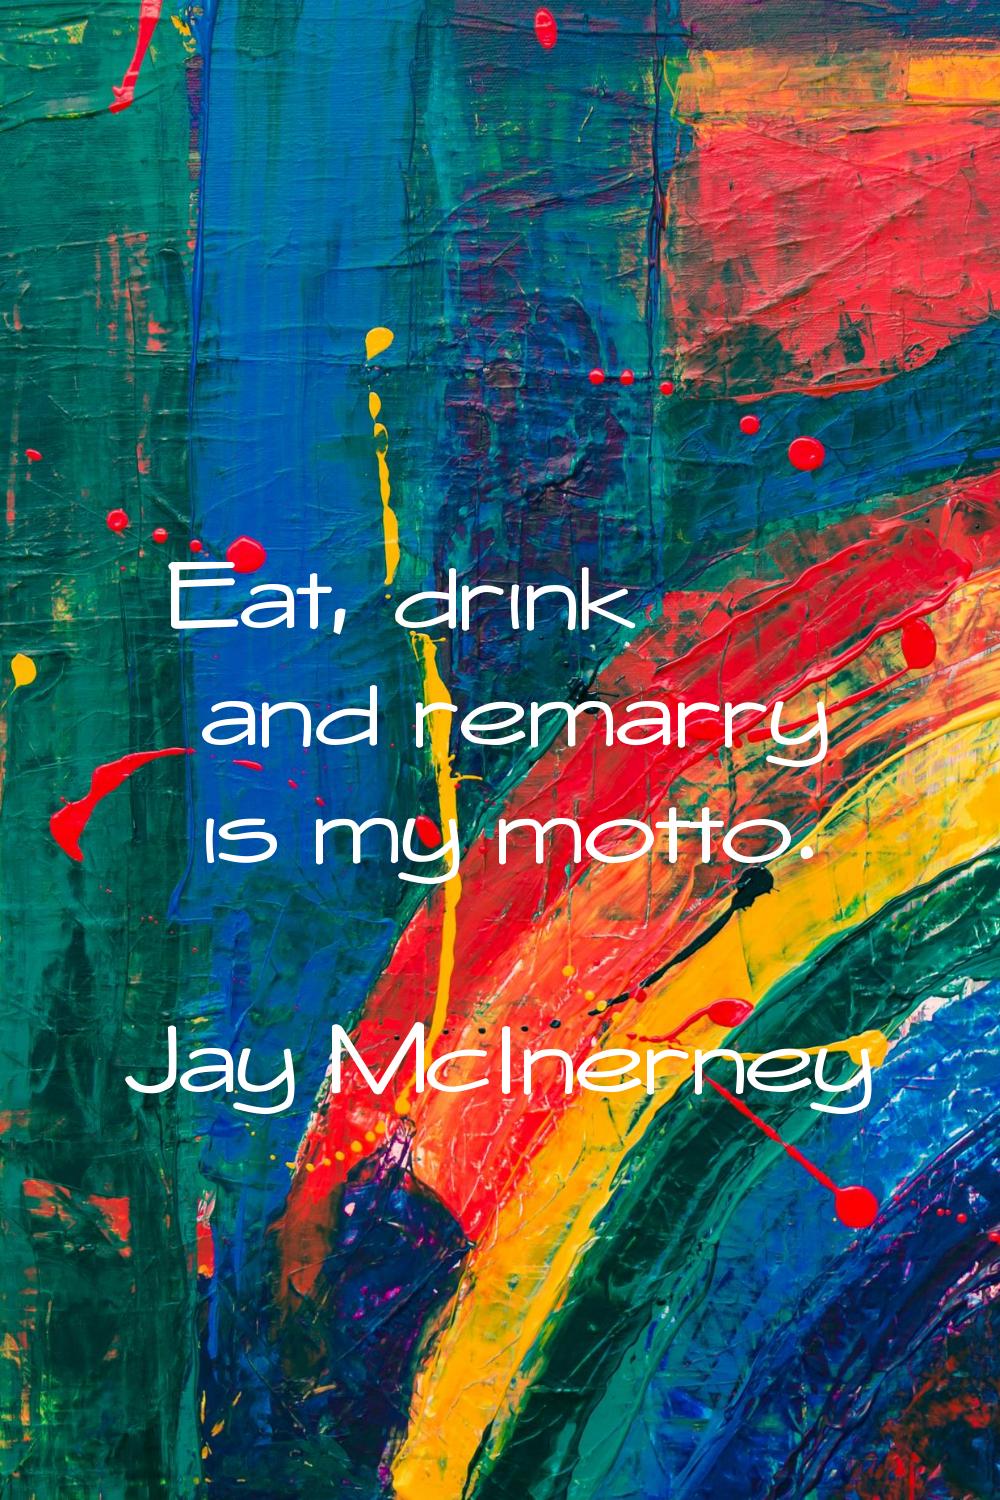 Eat, drink and remarry is my motto.